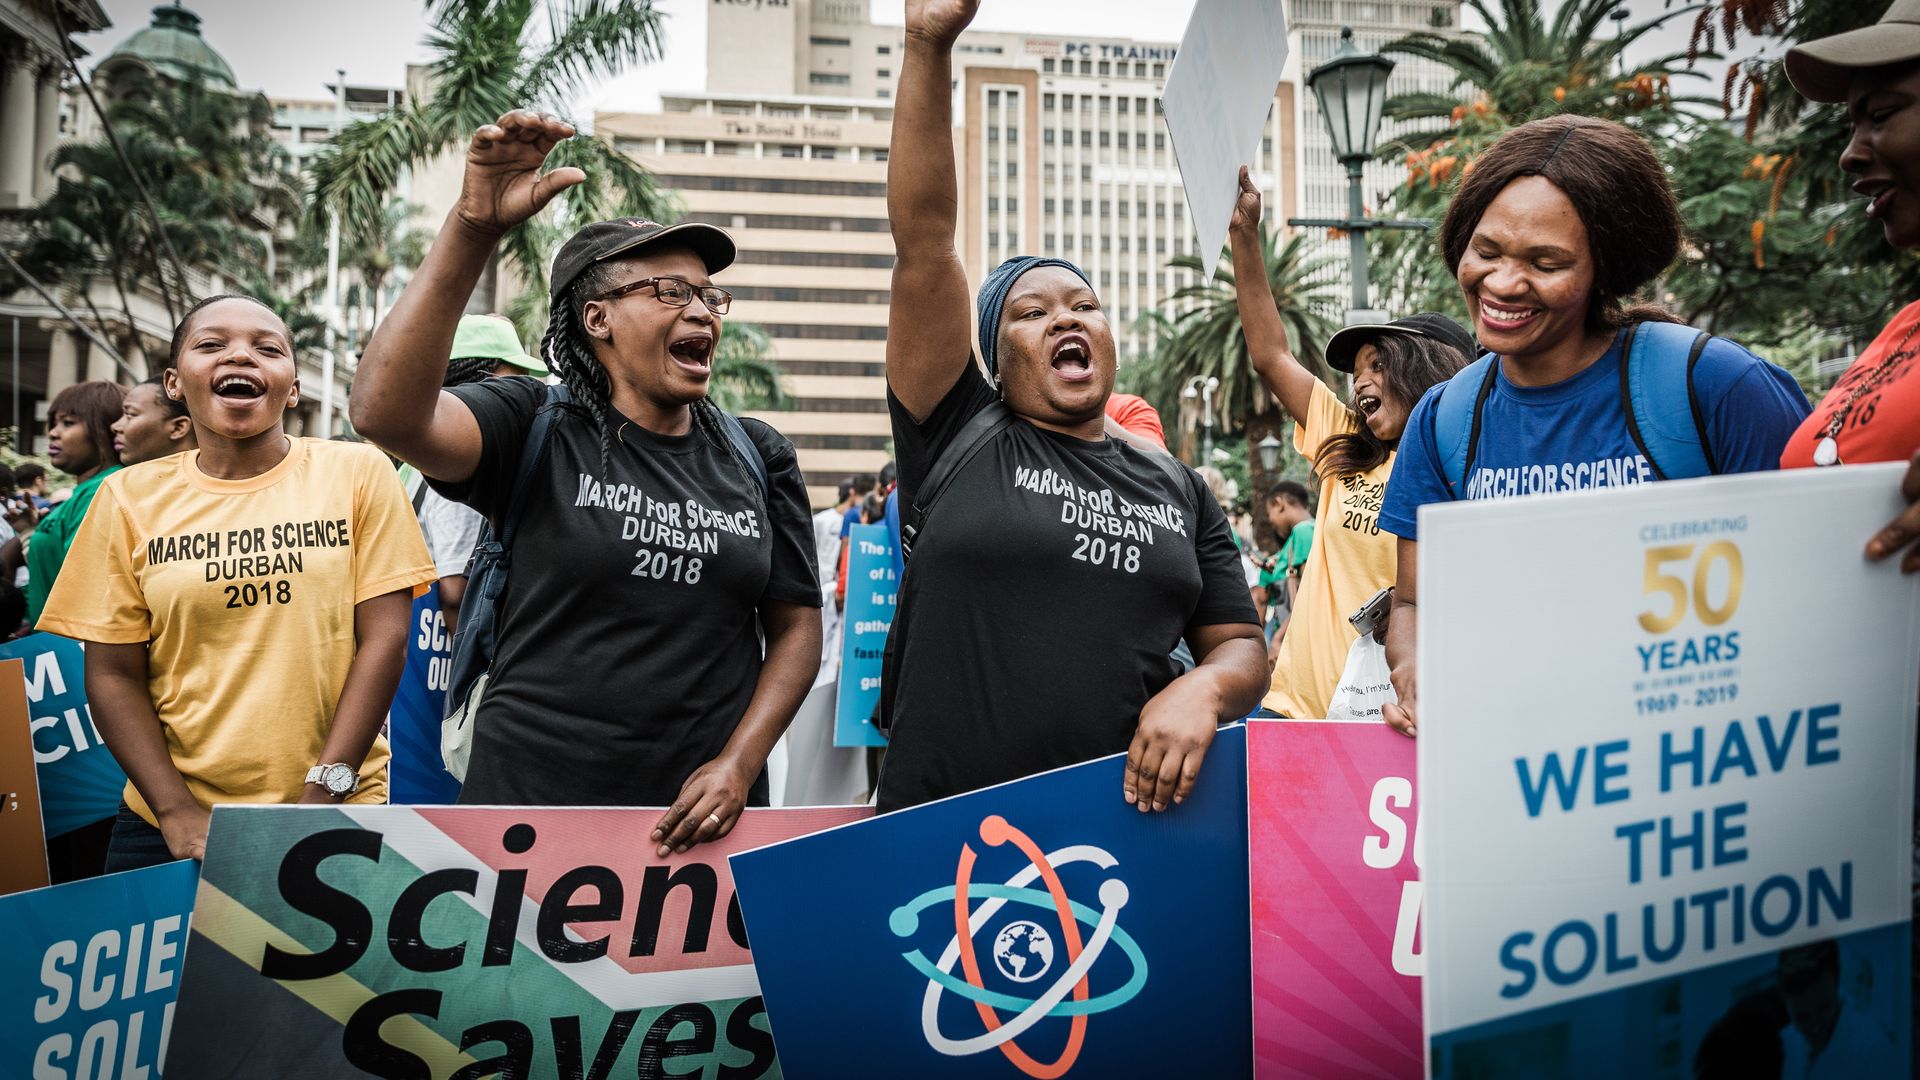 People holding banners shout slogans during the 'March for Science' in Durban